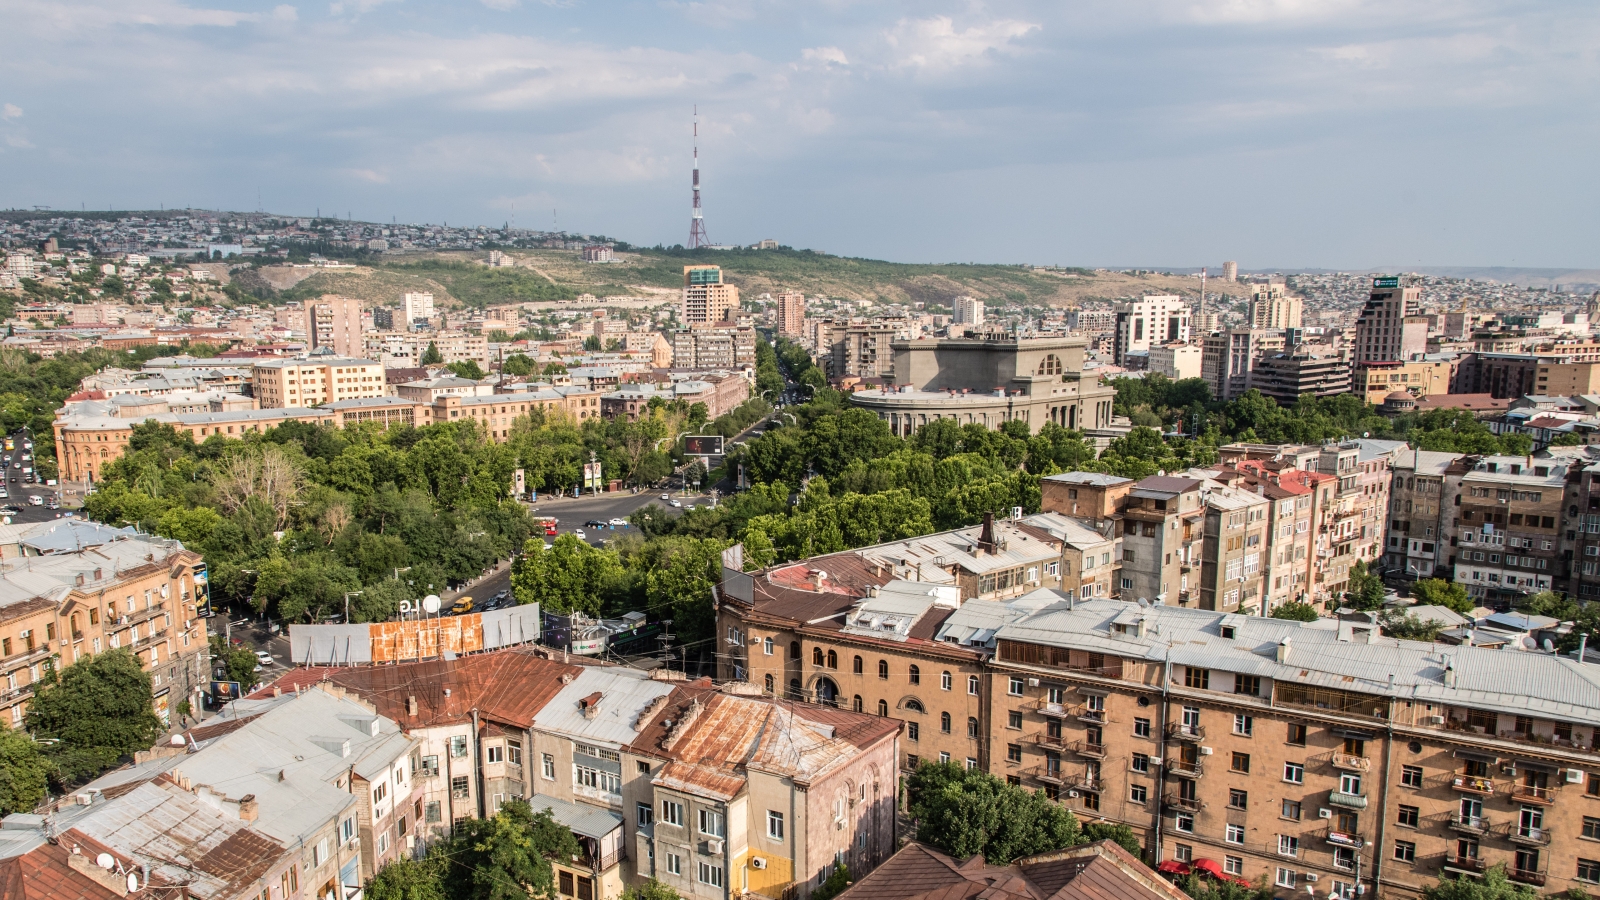 Yerevan has better quality of life than Baku, Tbilisi – according to Mercer’s Quality of Living Survey 2019